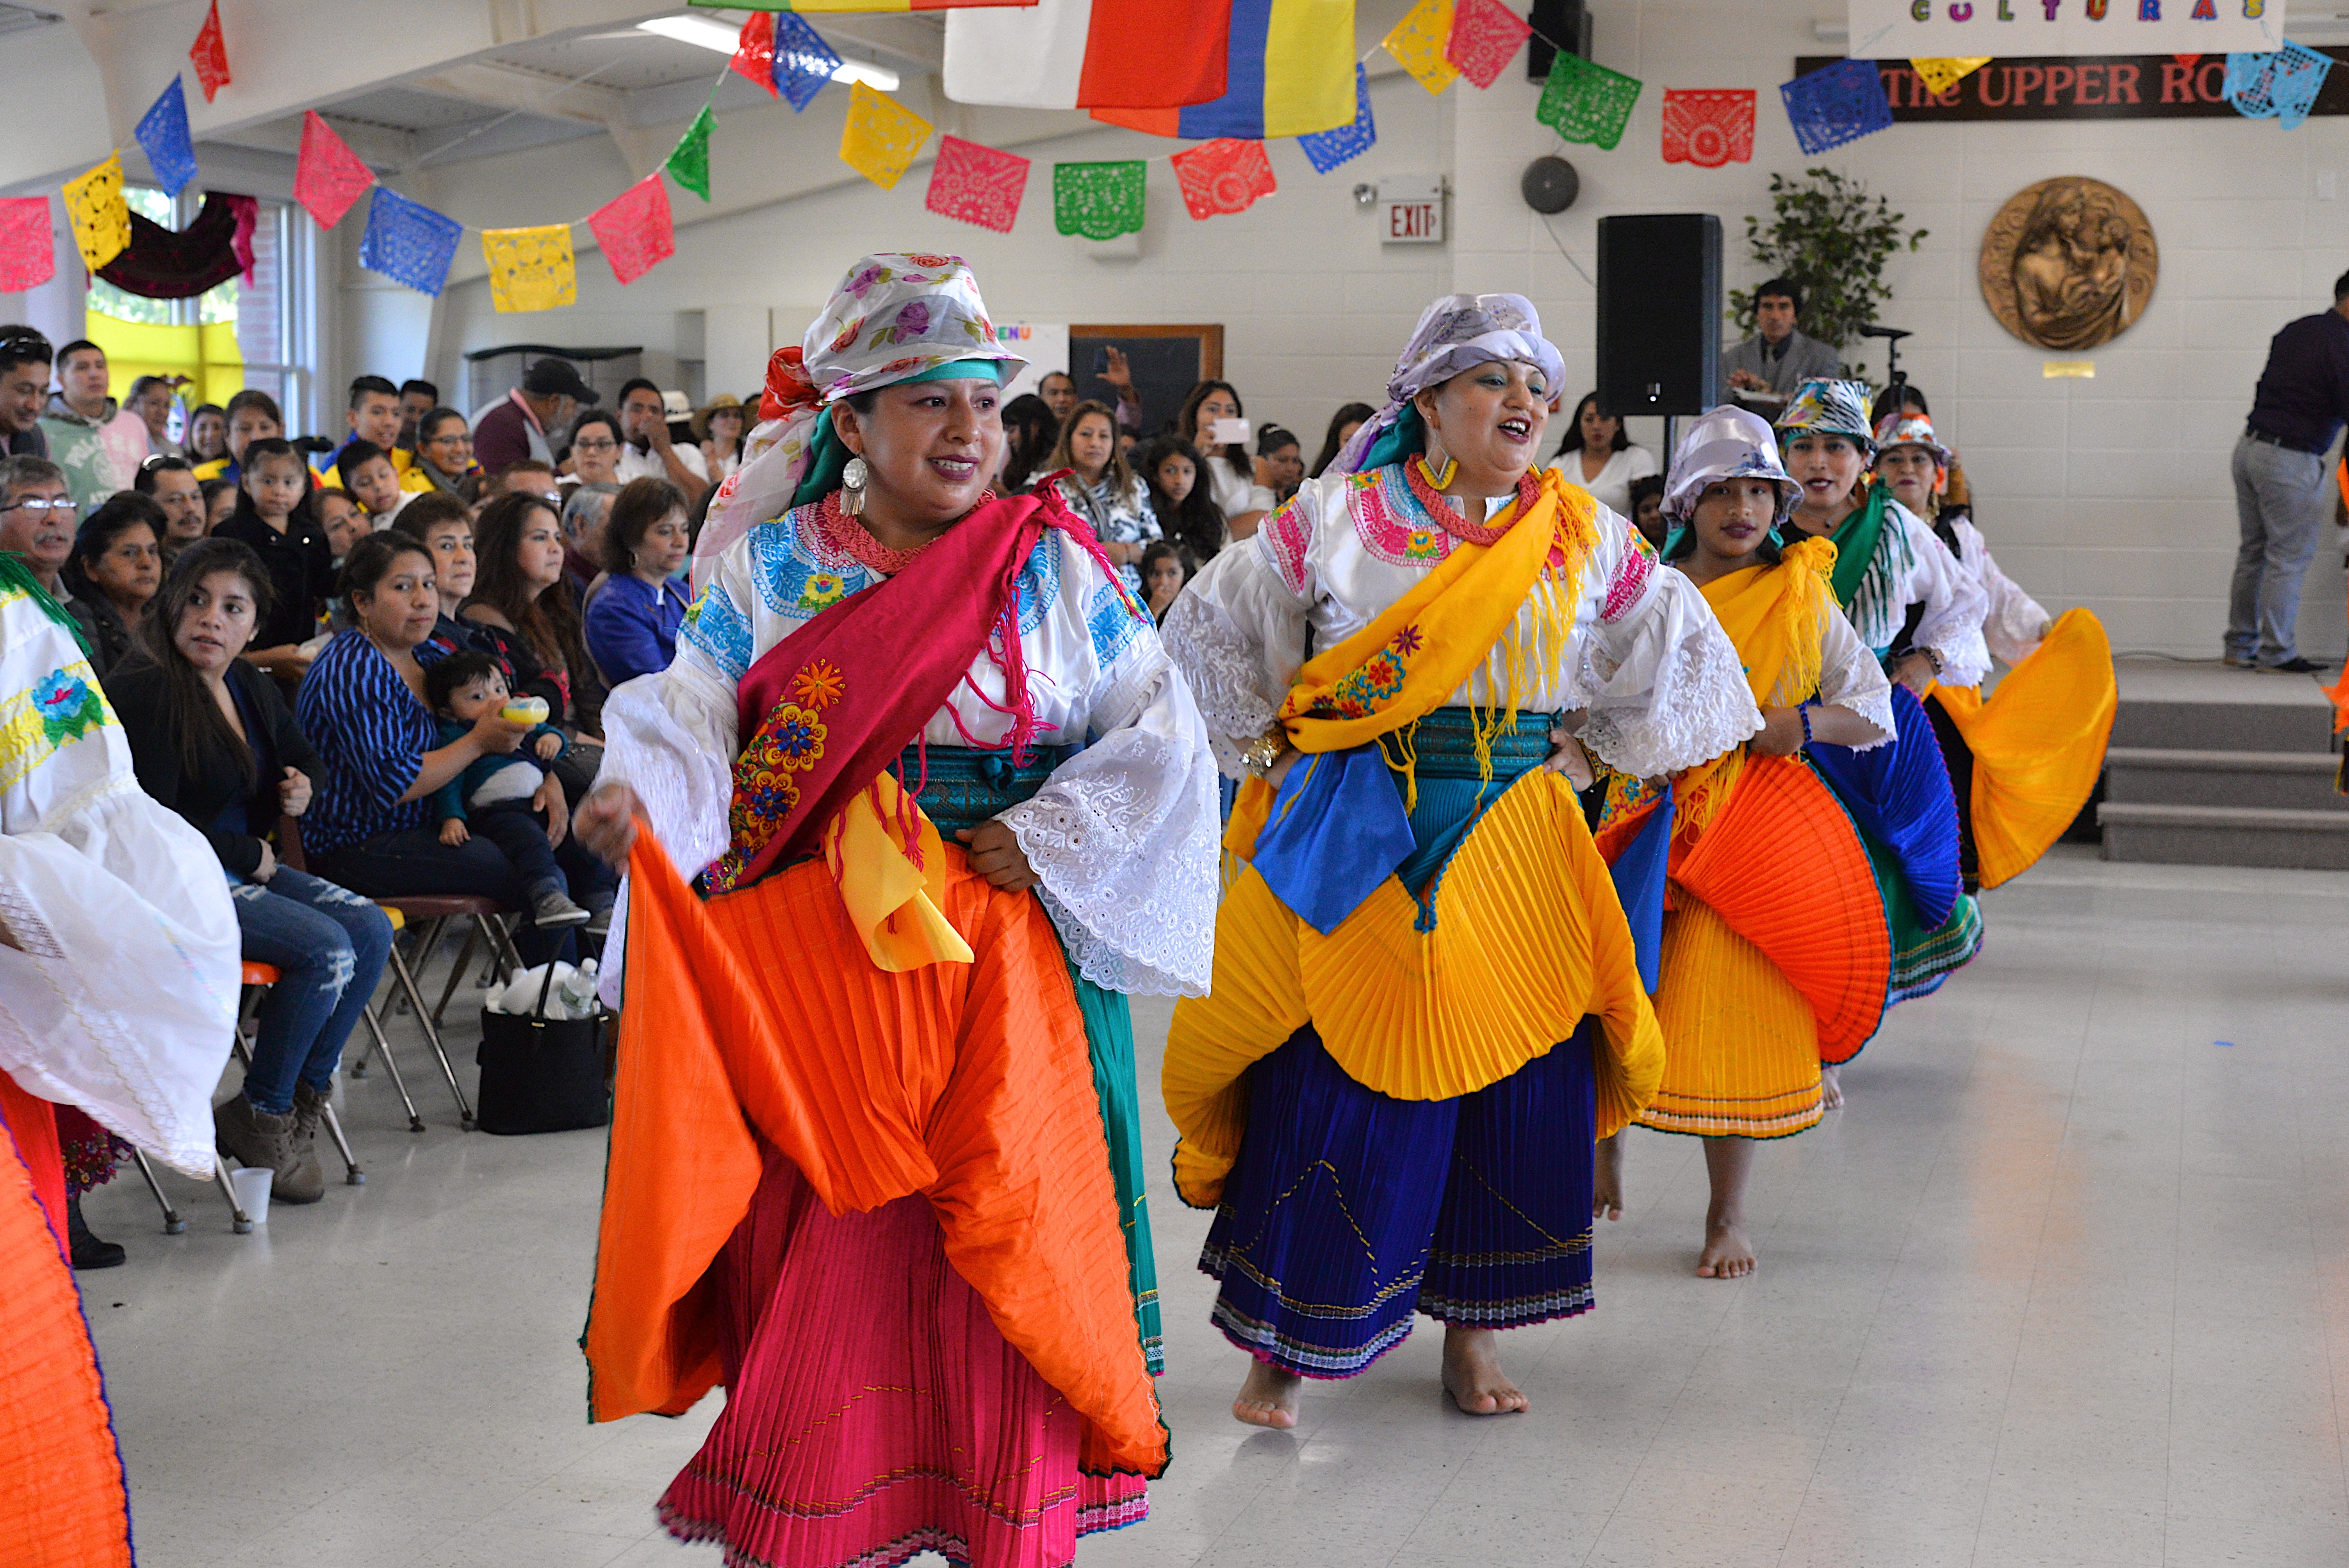 St. Therese Of Lisieux Church in Montauk hosted an International Cultural Festival on Sunday, with food, costumes and dances from Latin American nations. KYRIL BROMLEY 